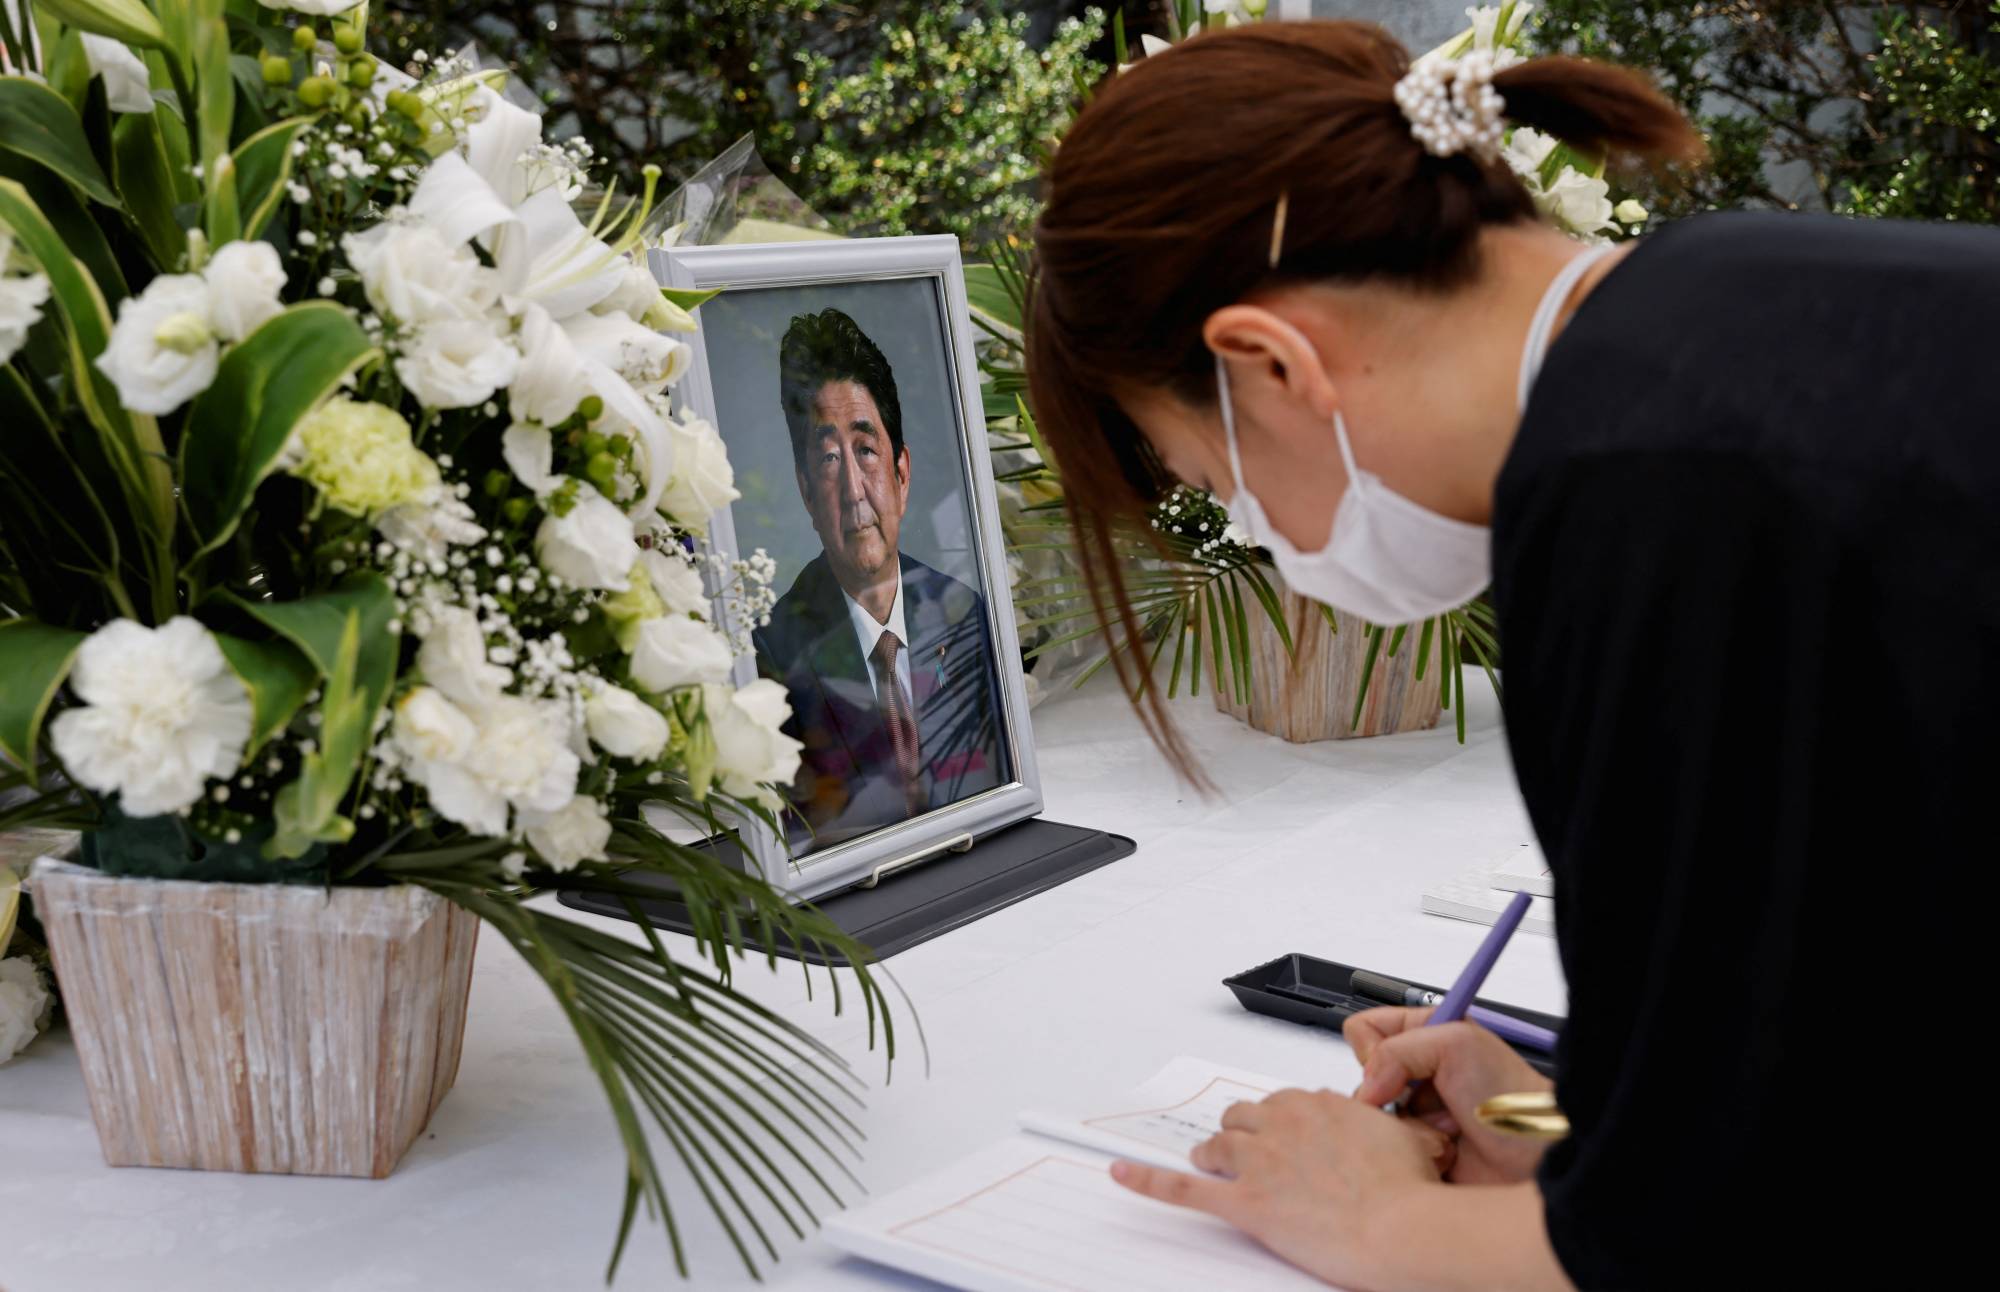 A mourner signs a book in front of a portrait of late former Prime Minister Shinzo Abe on an altar at the Liberal Democratic Party headquarters in Tokyo on Monday. | REUTERS